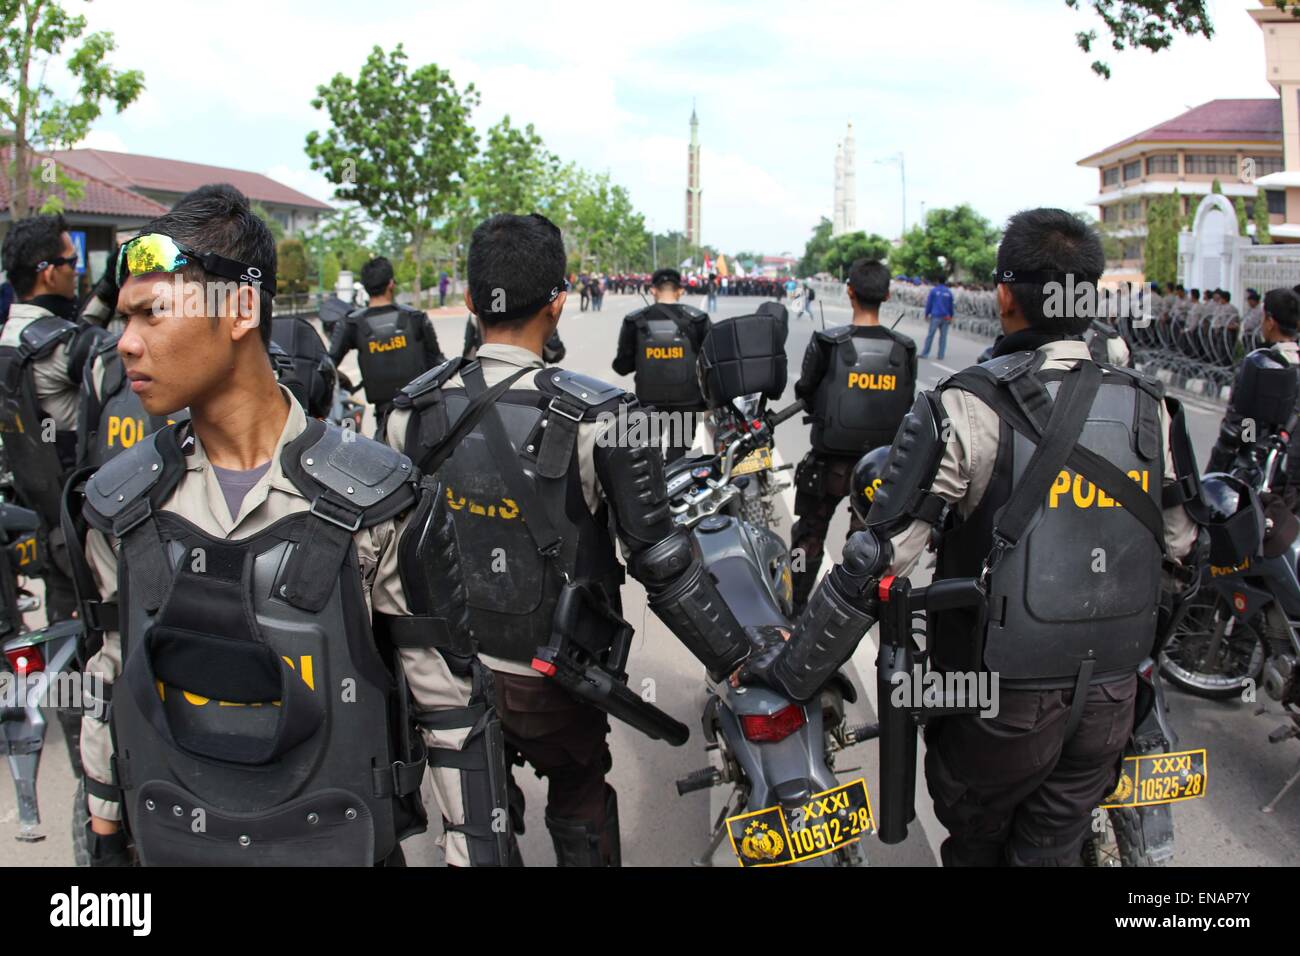 Batam, Kepri, Indonesia. 1st May, 2015. BATAM, INDONESIA - MAY 01: Indonesia police guard labours on action demanding an increase on welfare, health and remove emplyment contarcts during International Labour Day called May Day on Mei 01, 2015 in Batam, Indonesia. Credit:  Sijori Images/ZUMA Wire/Alamy Live News Stock Photo